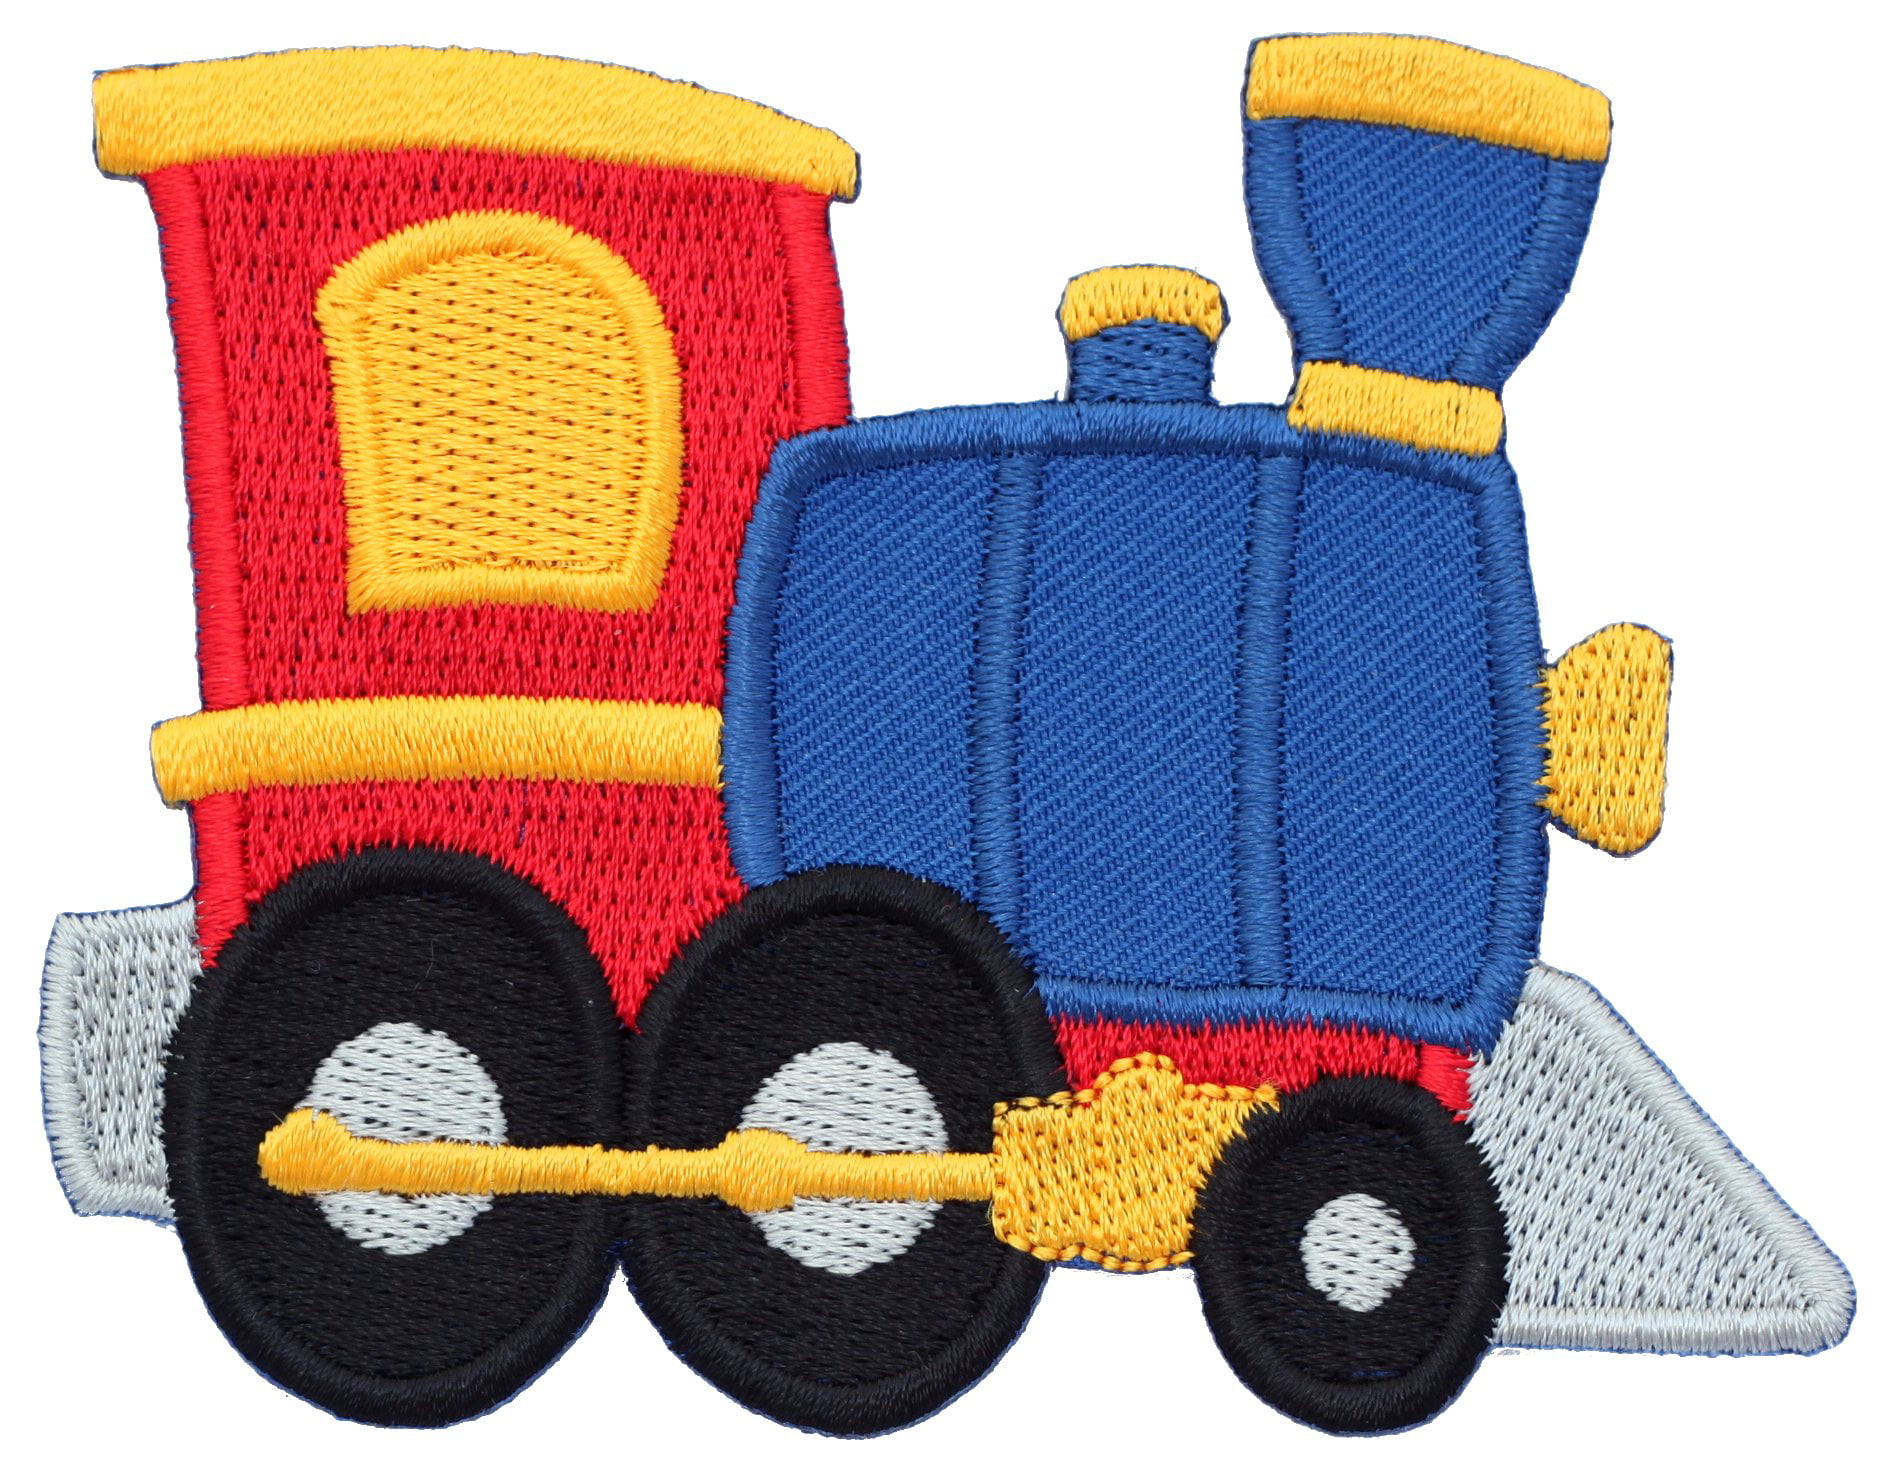 IRON ON EMBROIDERED APPLIQUE PLANE TRAIN OR LORRY........A031-34 TRACTOR